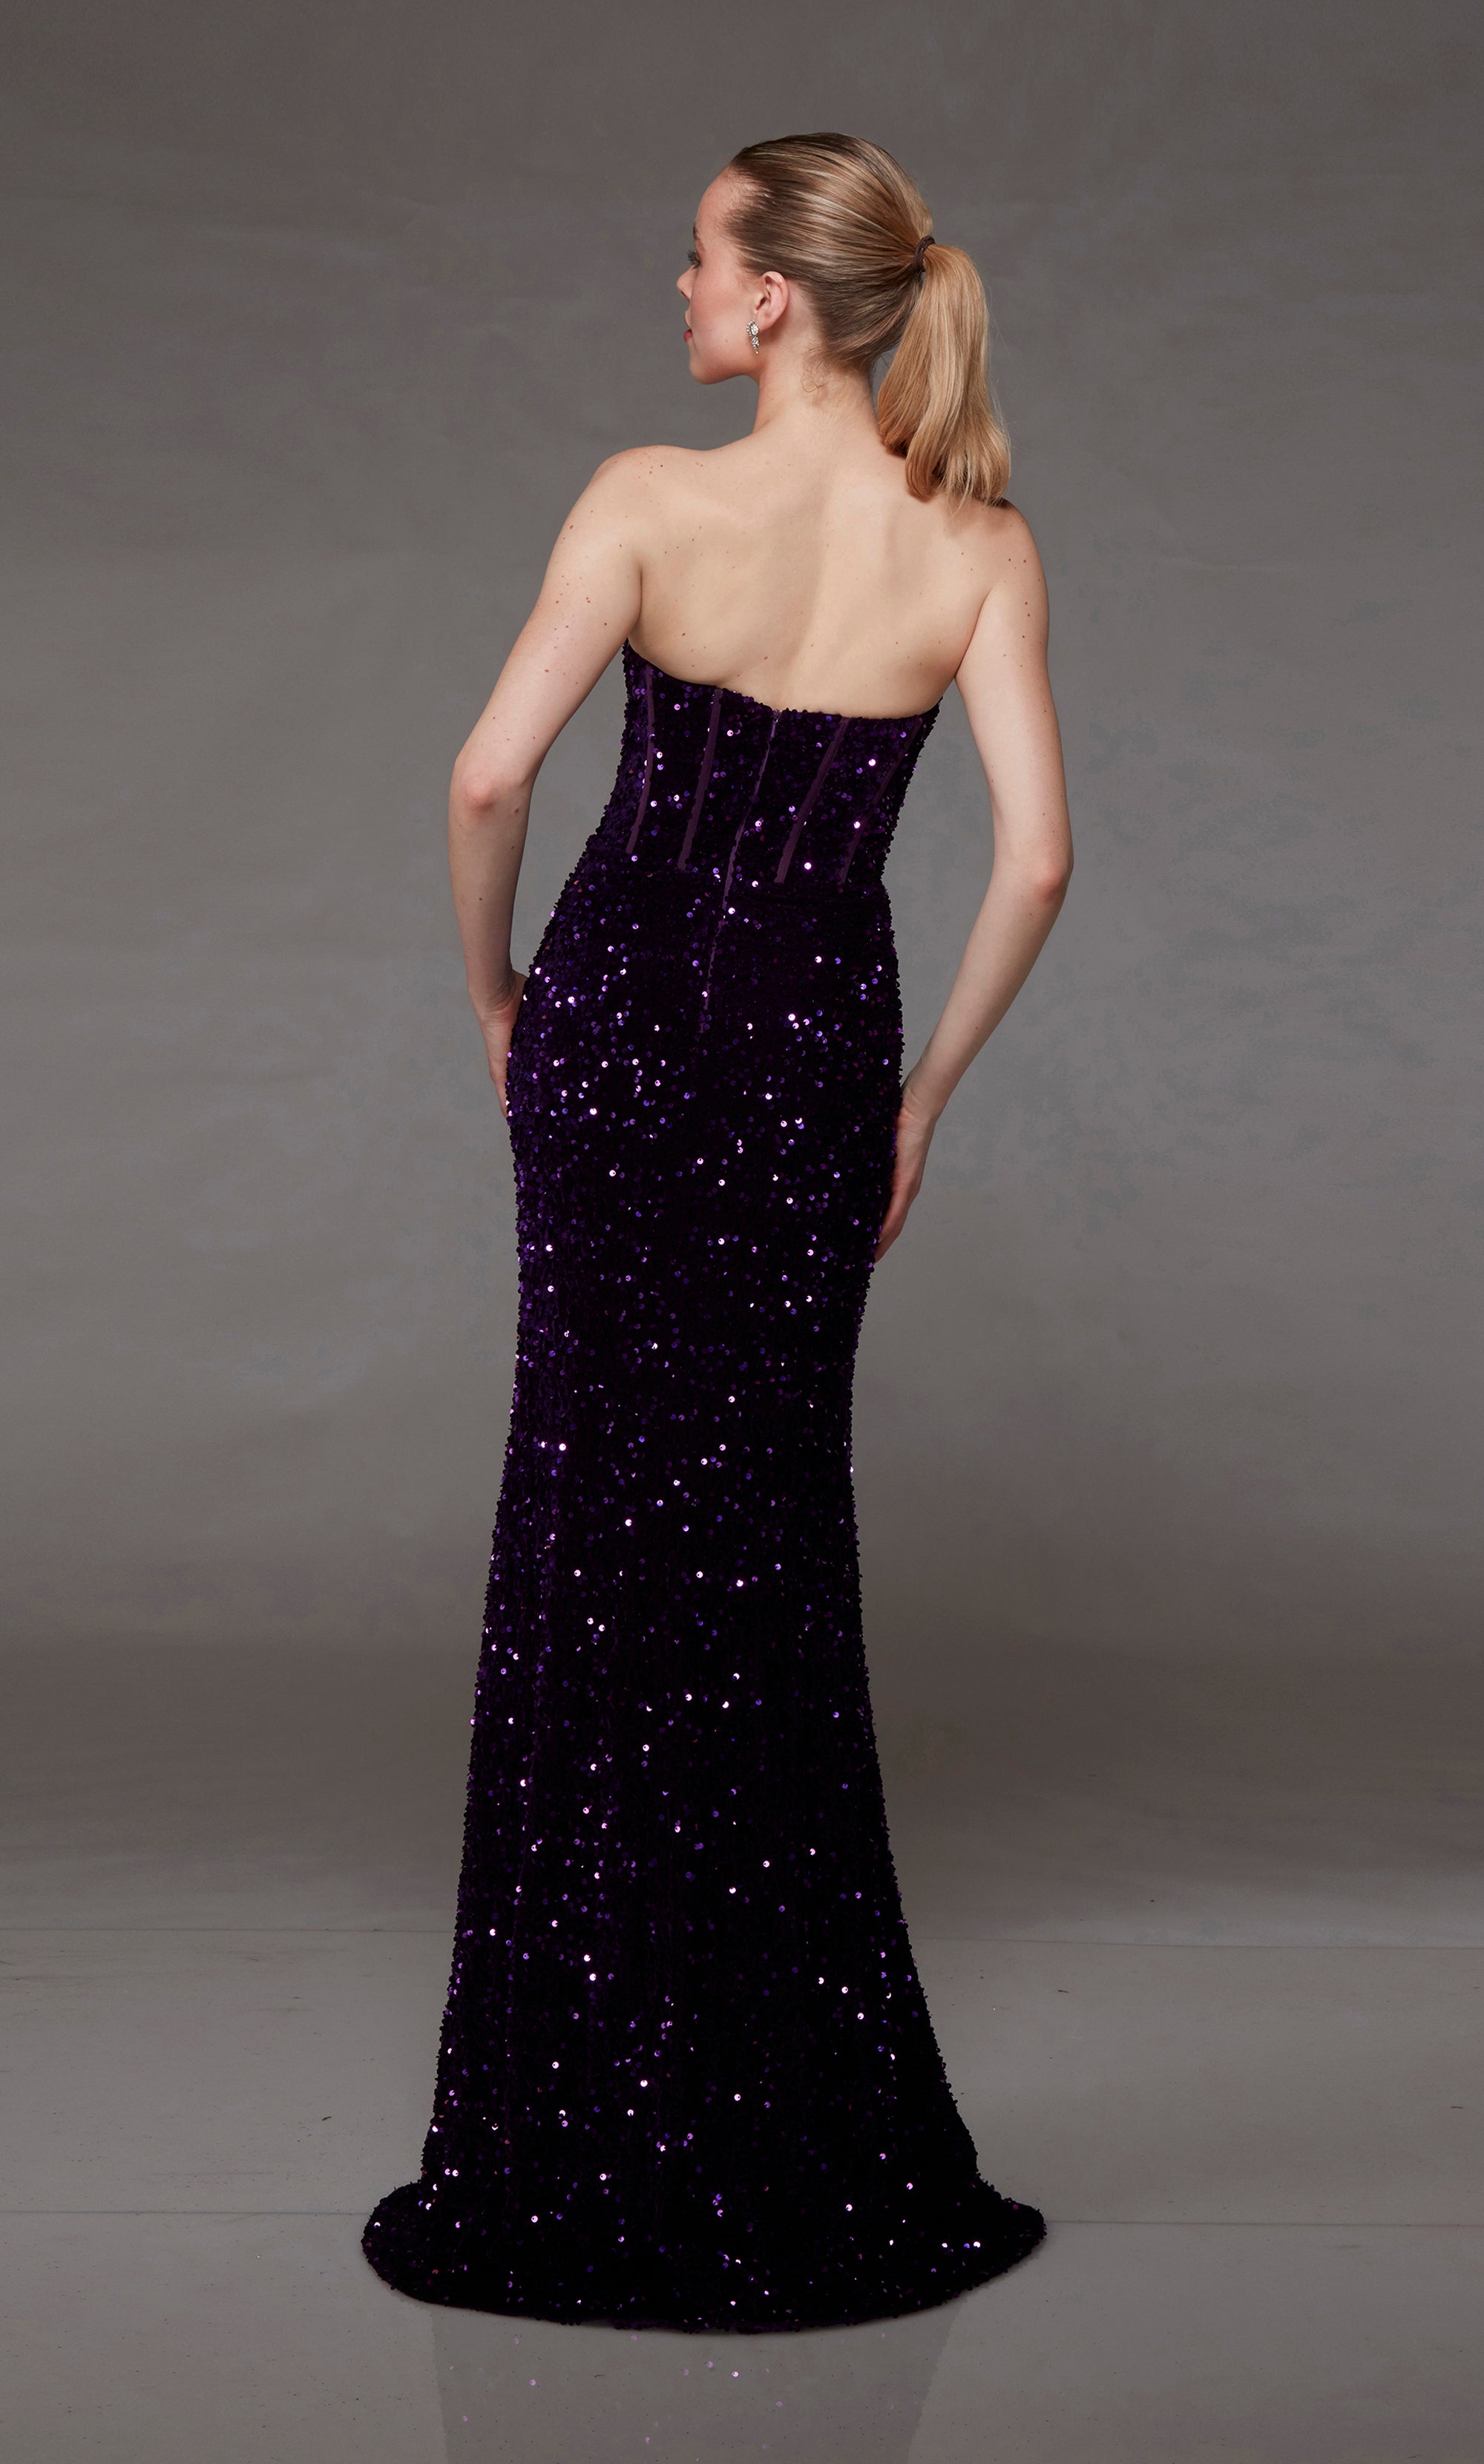 Purple sequin prom dress: Strapless corset top, side slit, and slight train for an chic and modern aesthetic.